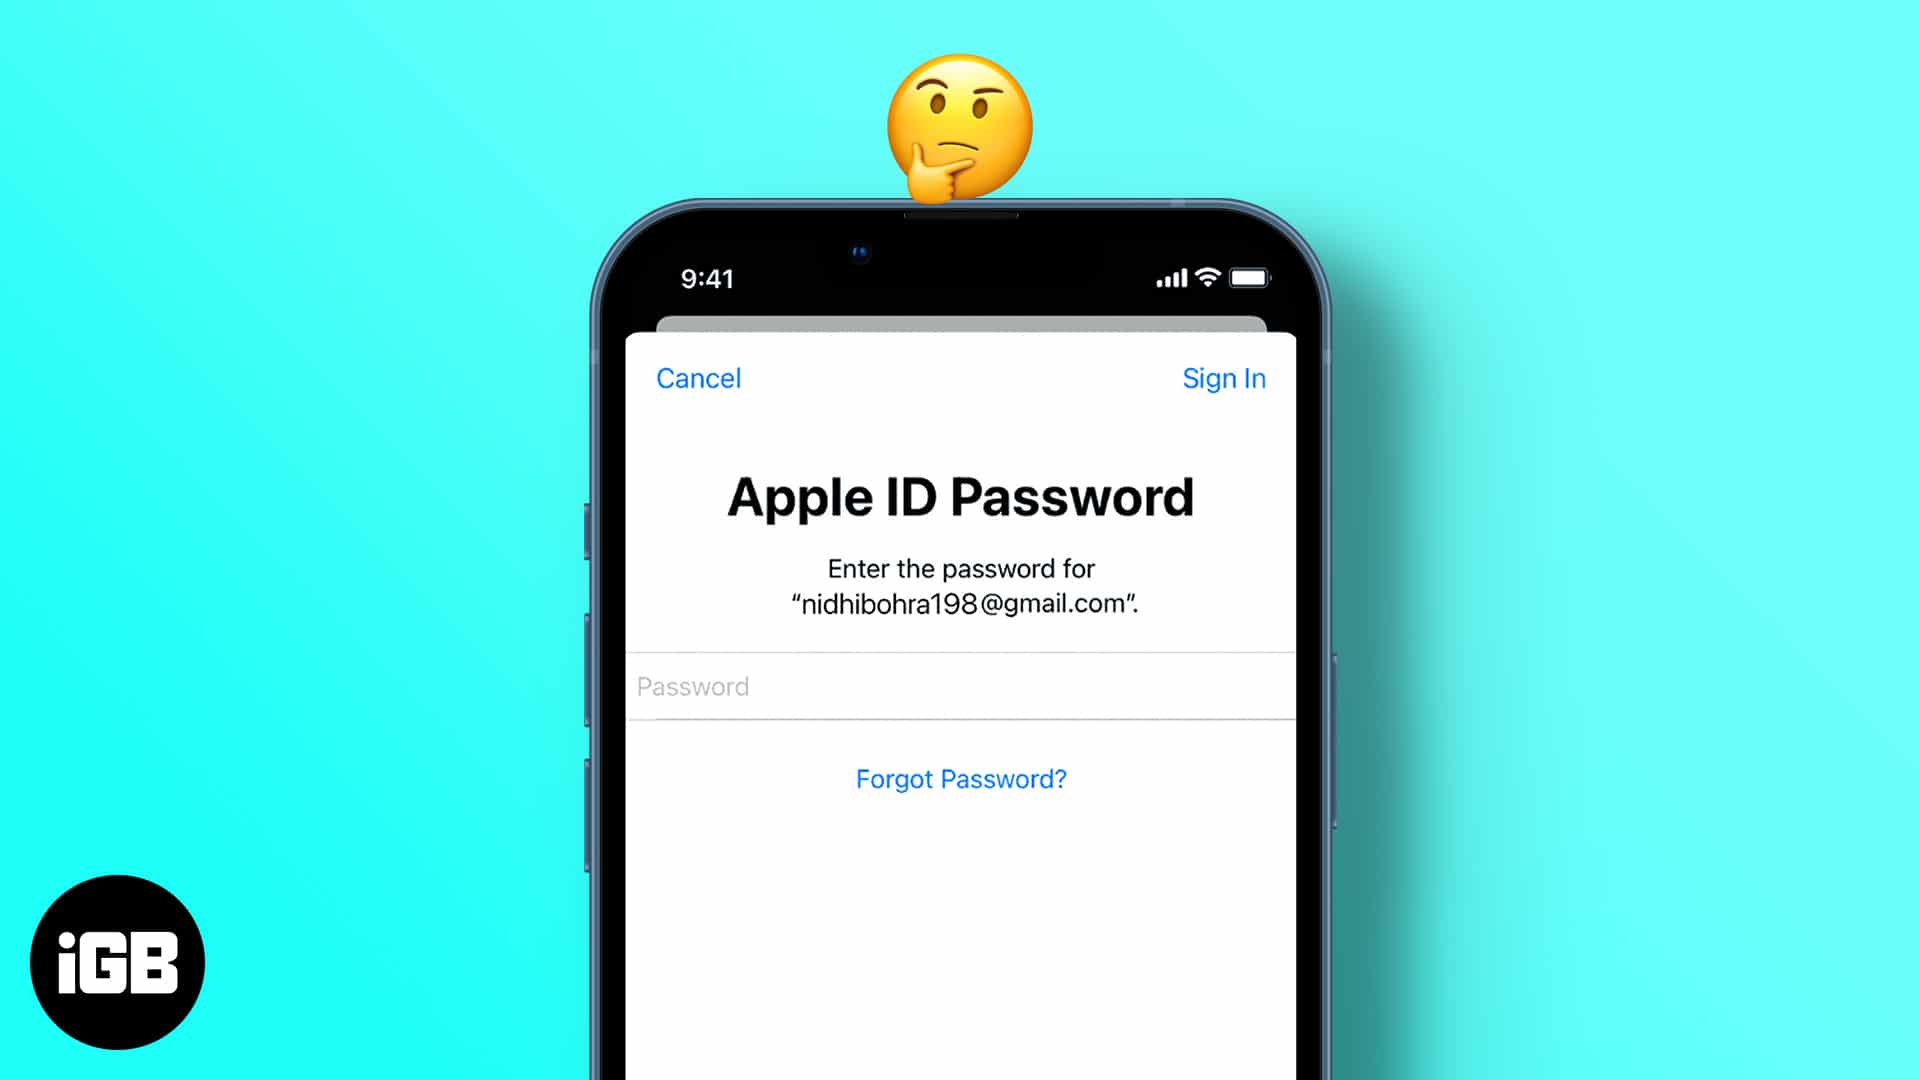 Iphone keeps asking for apple id password